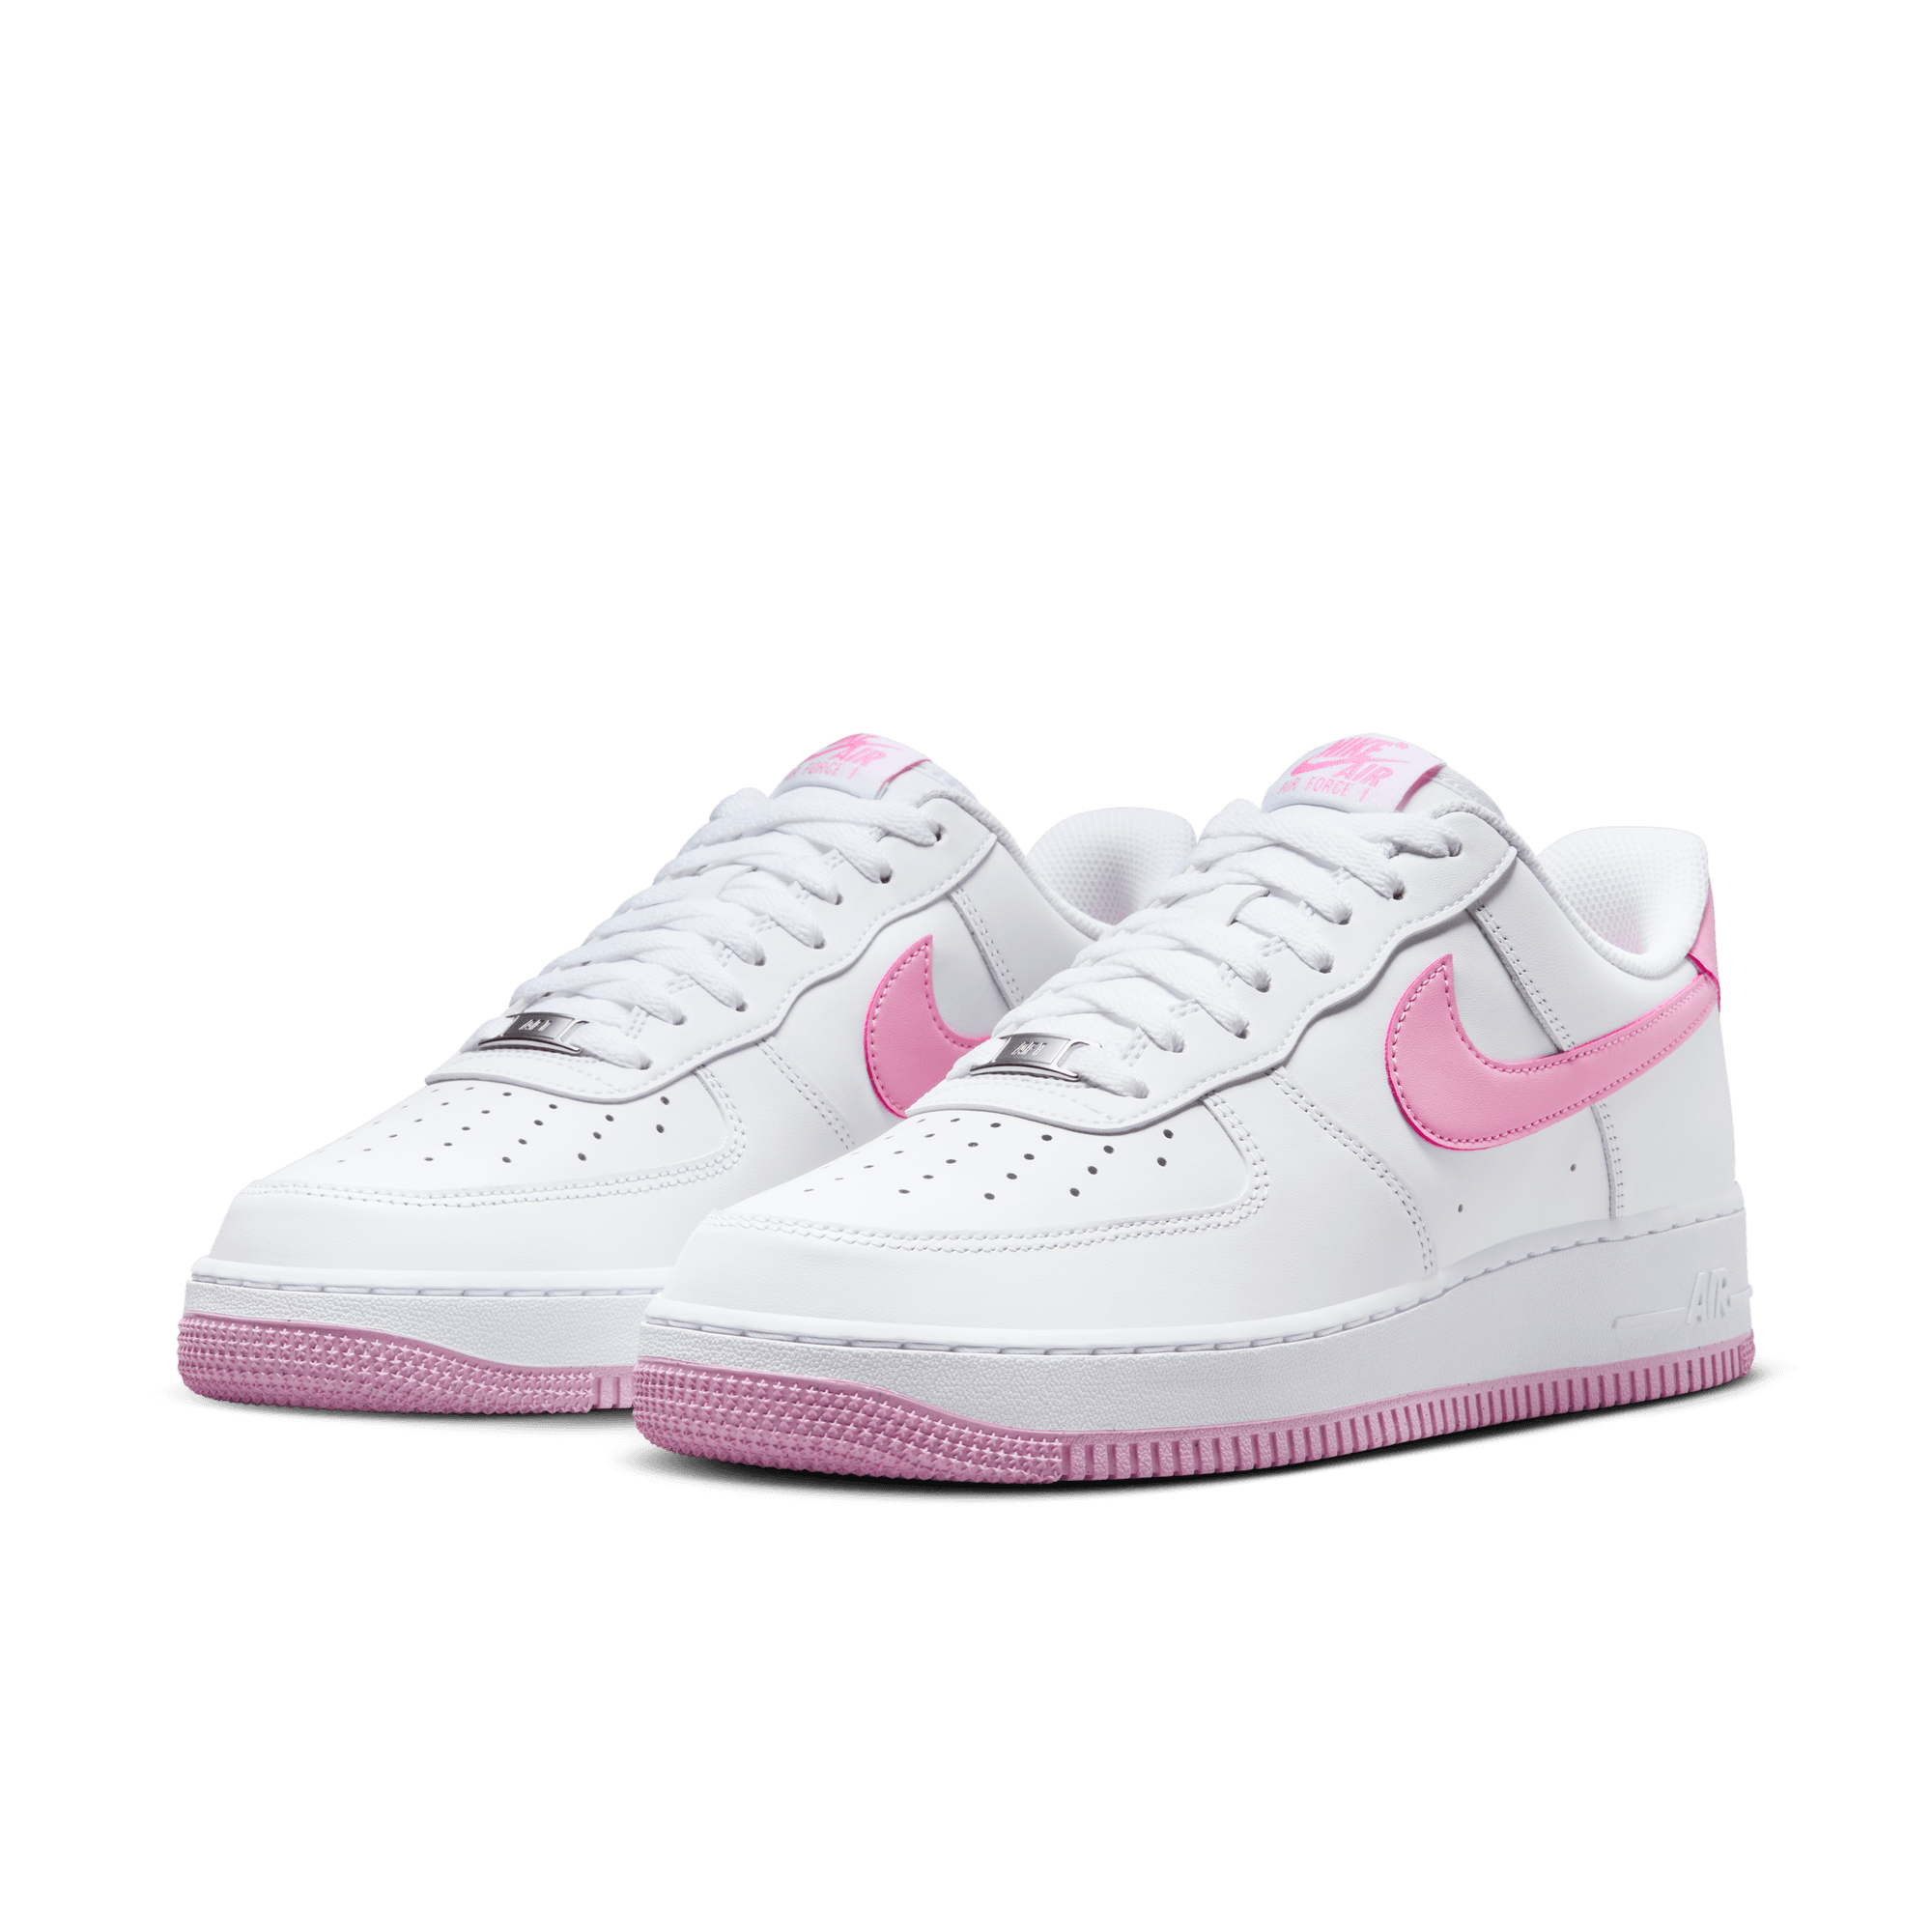 NIKE AIR FORCE 1  '07  MEN'S  SHOES